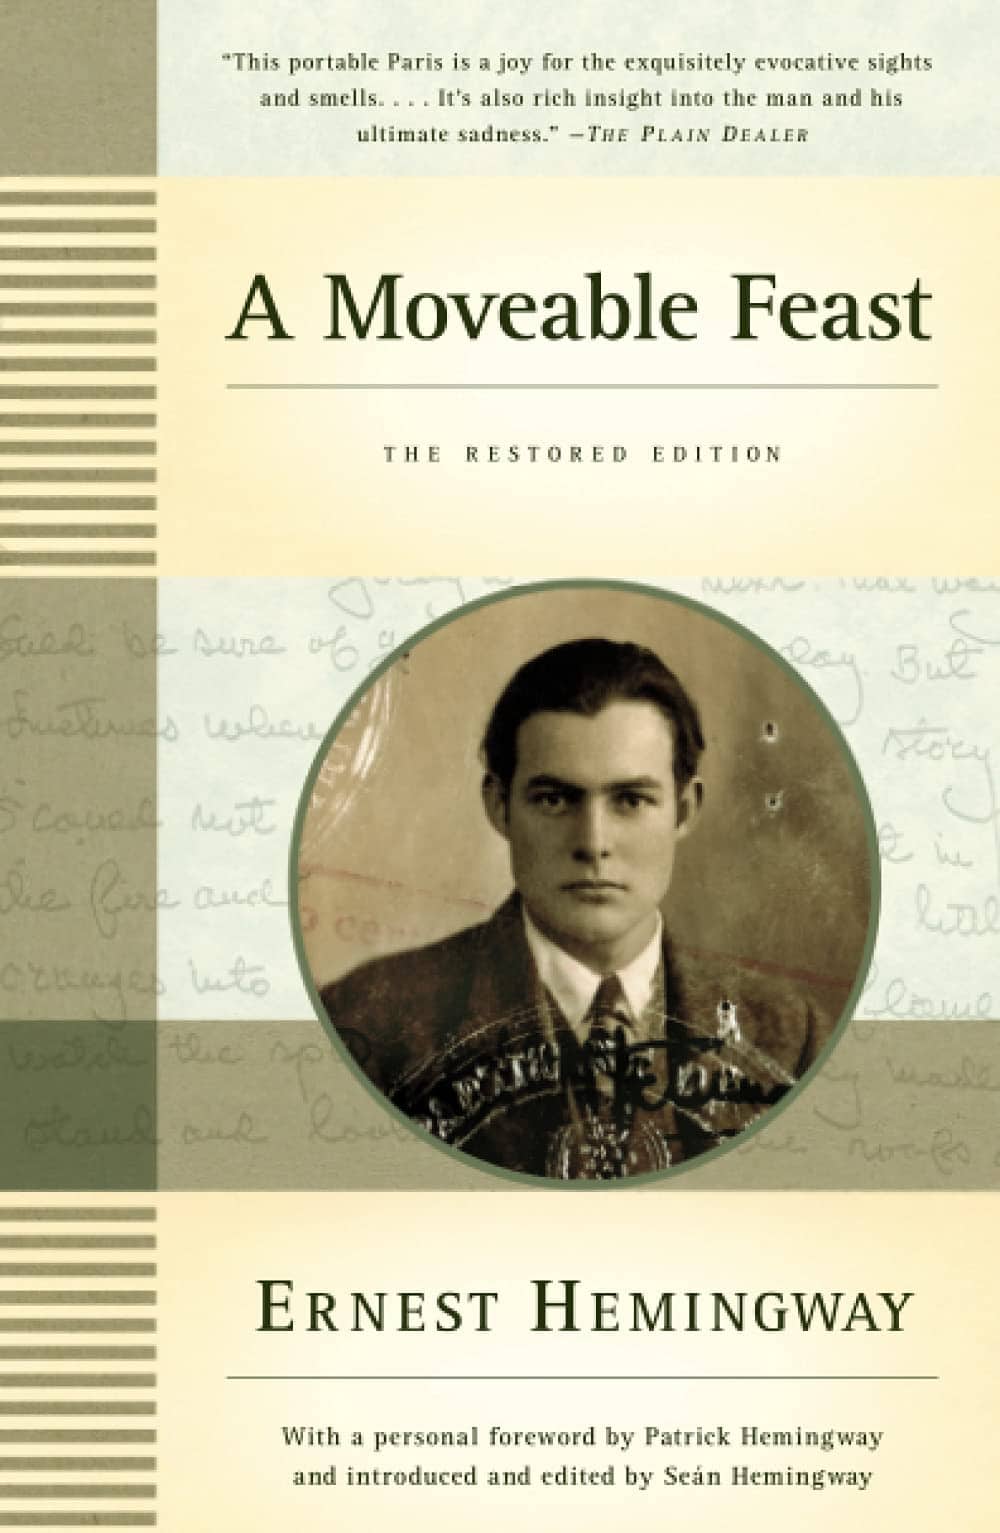 A Moveable Feast, one of the best travel memoirs of all-time